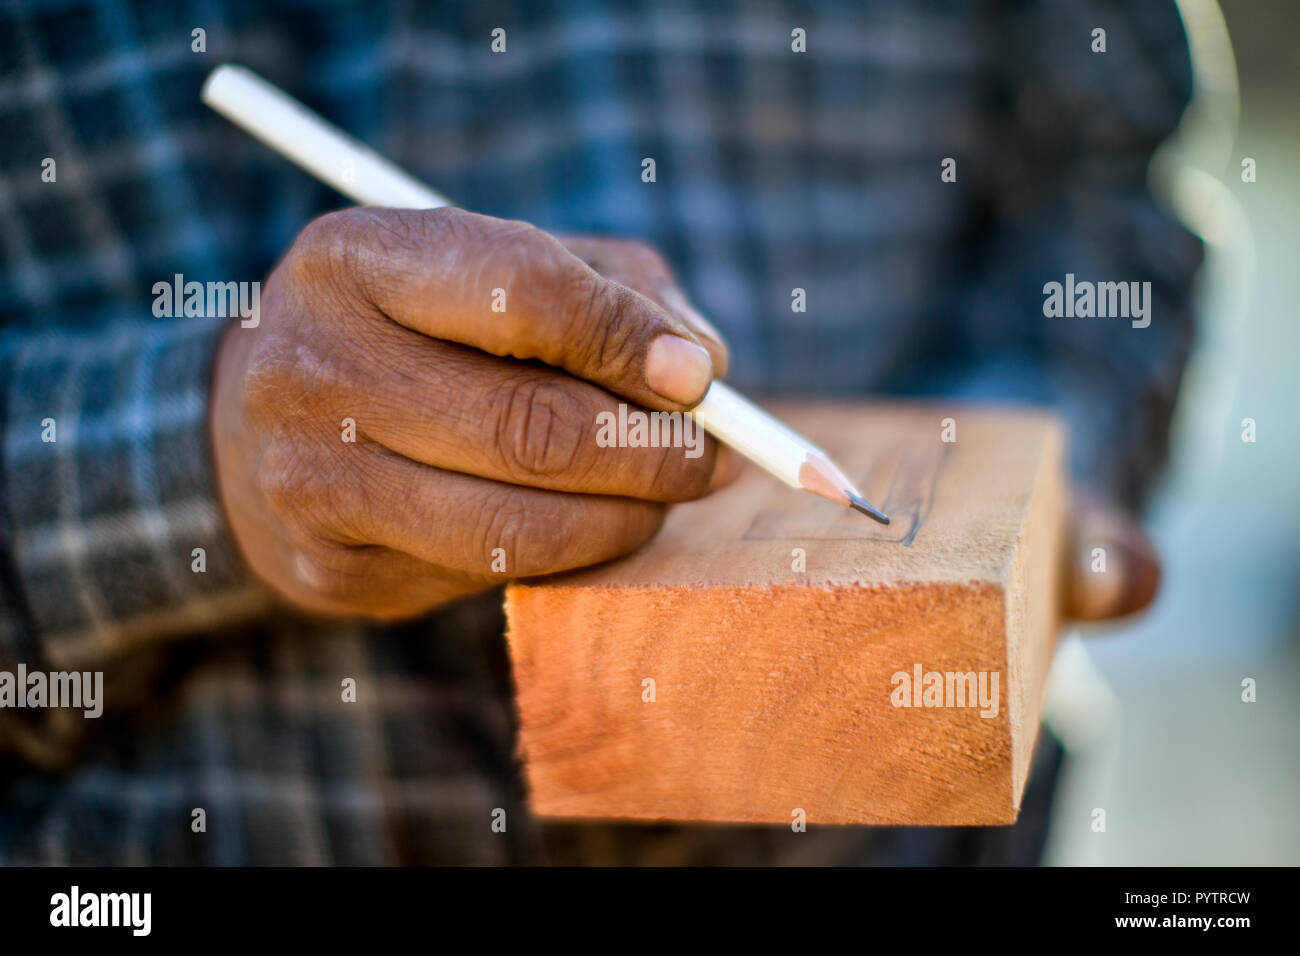 Builder cutting a piece of wood with a circular saw. Stock Photo